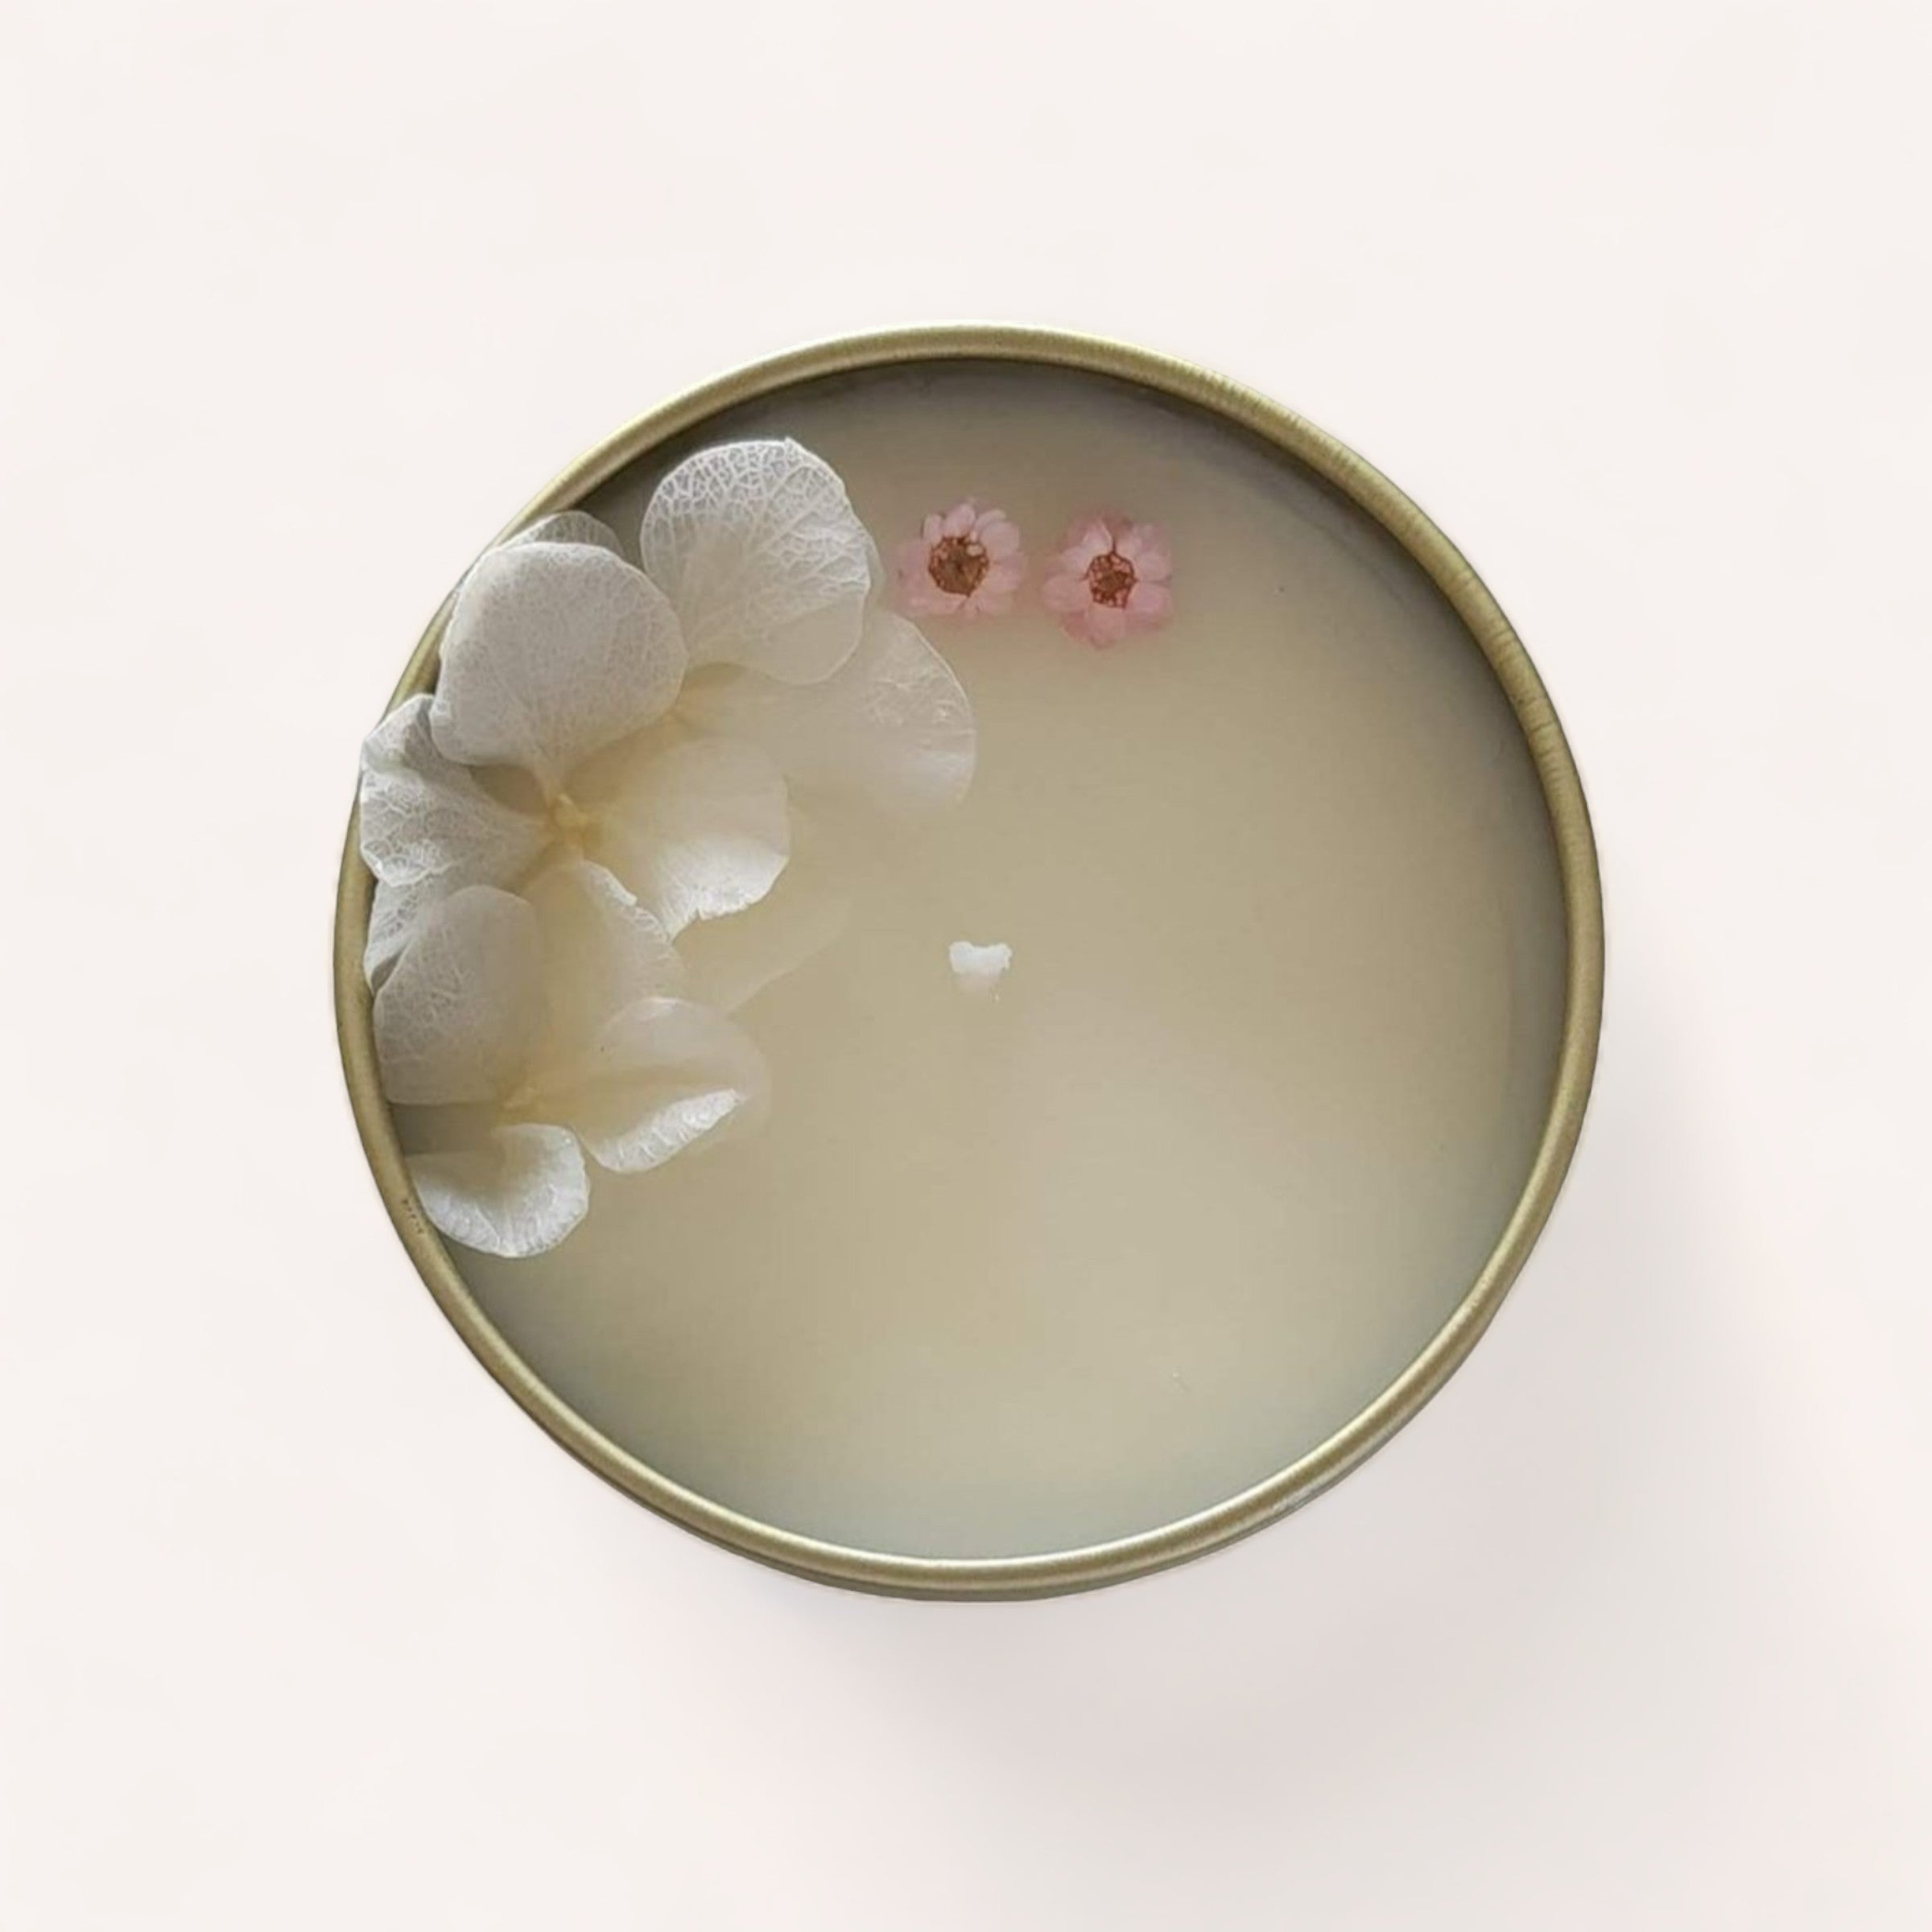 A serene bowl of water with delicate flowers gracefully floating on the surface, embodying tranquility and simplicity, beside a Coconut + Lime Candle by Wix's Lane Co infusing the air with its soothing aroma.